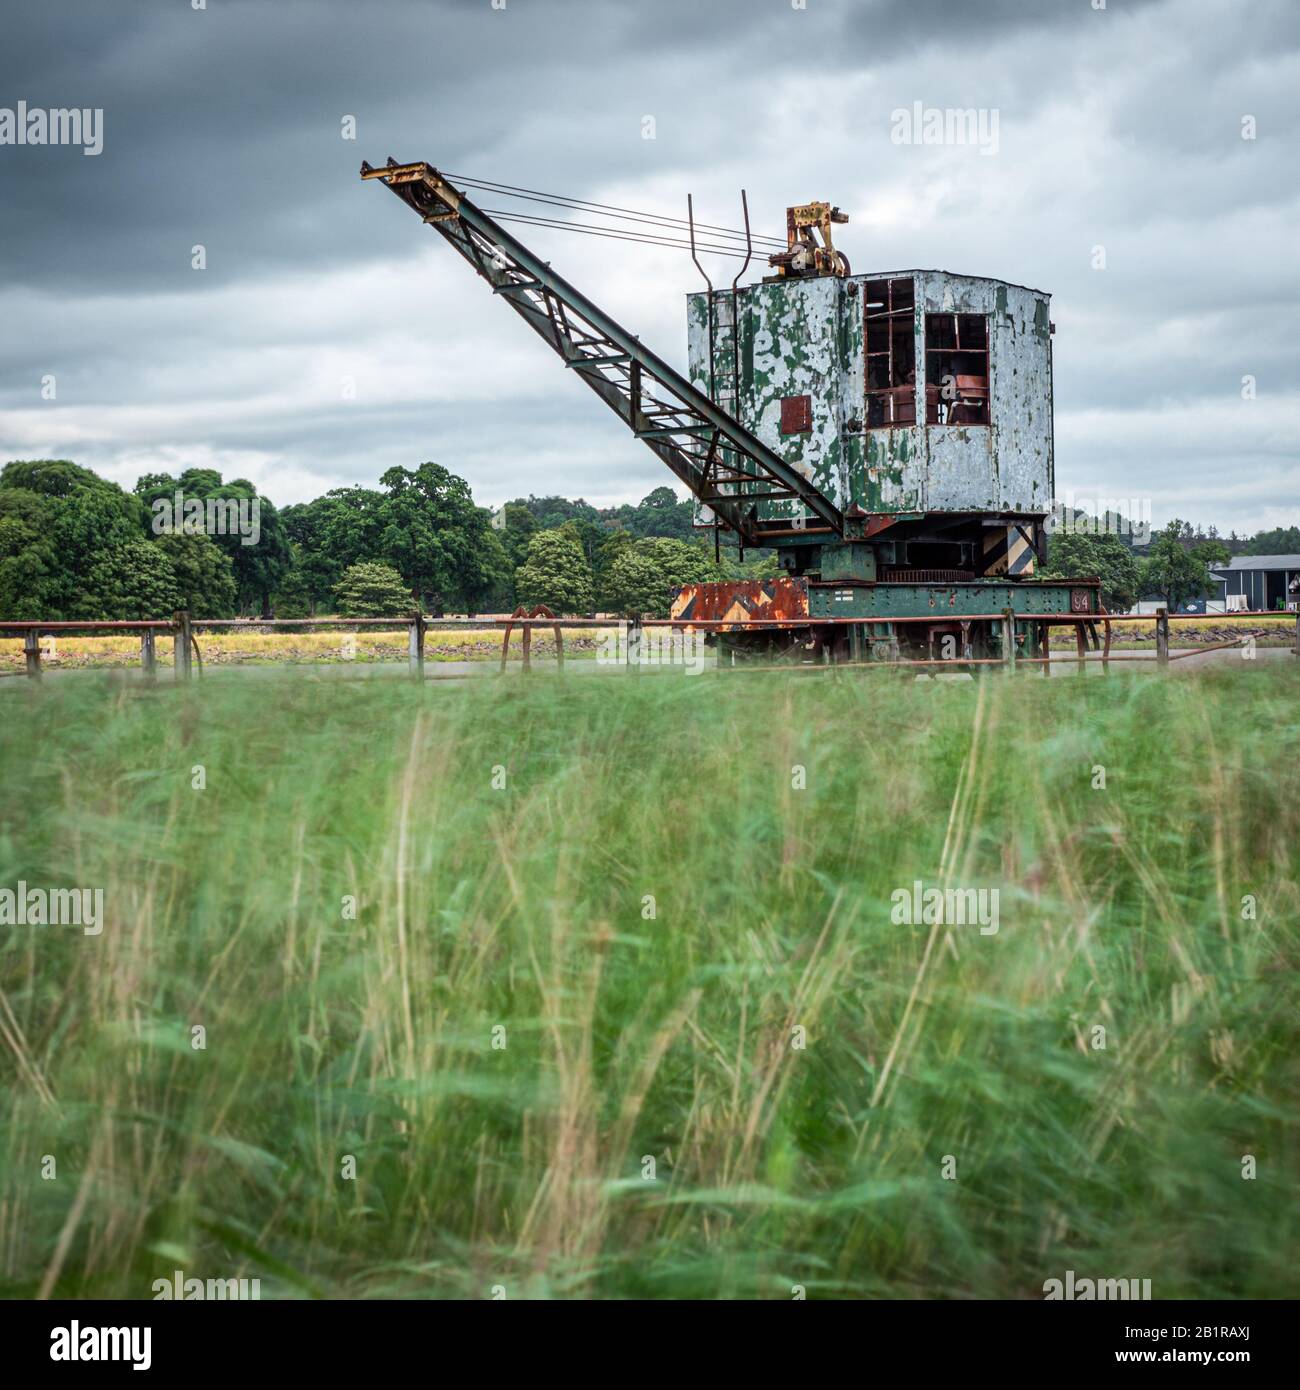 The rail mounted crane on the  old Admiralty pier at Bandeath Munitions Depot which was established in the First World War. Stock Photo